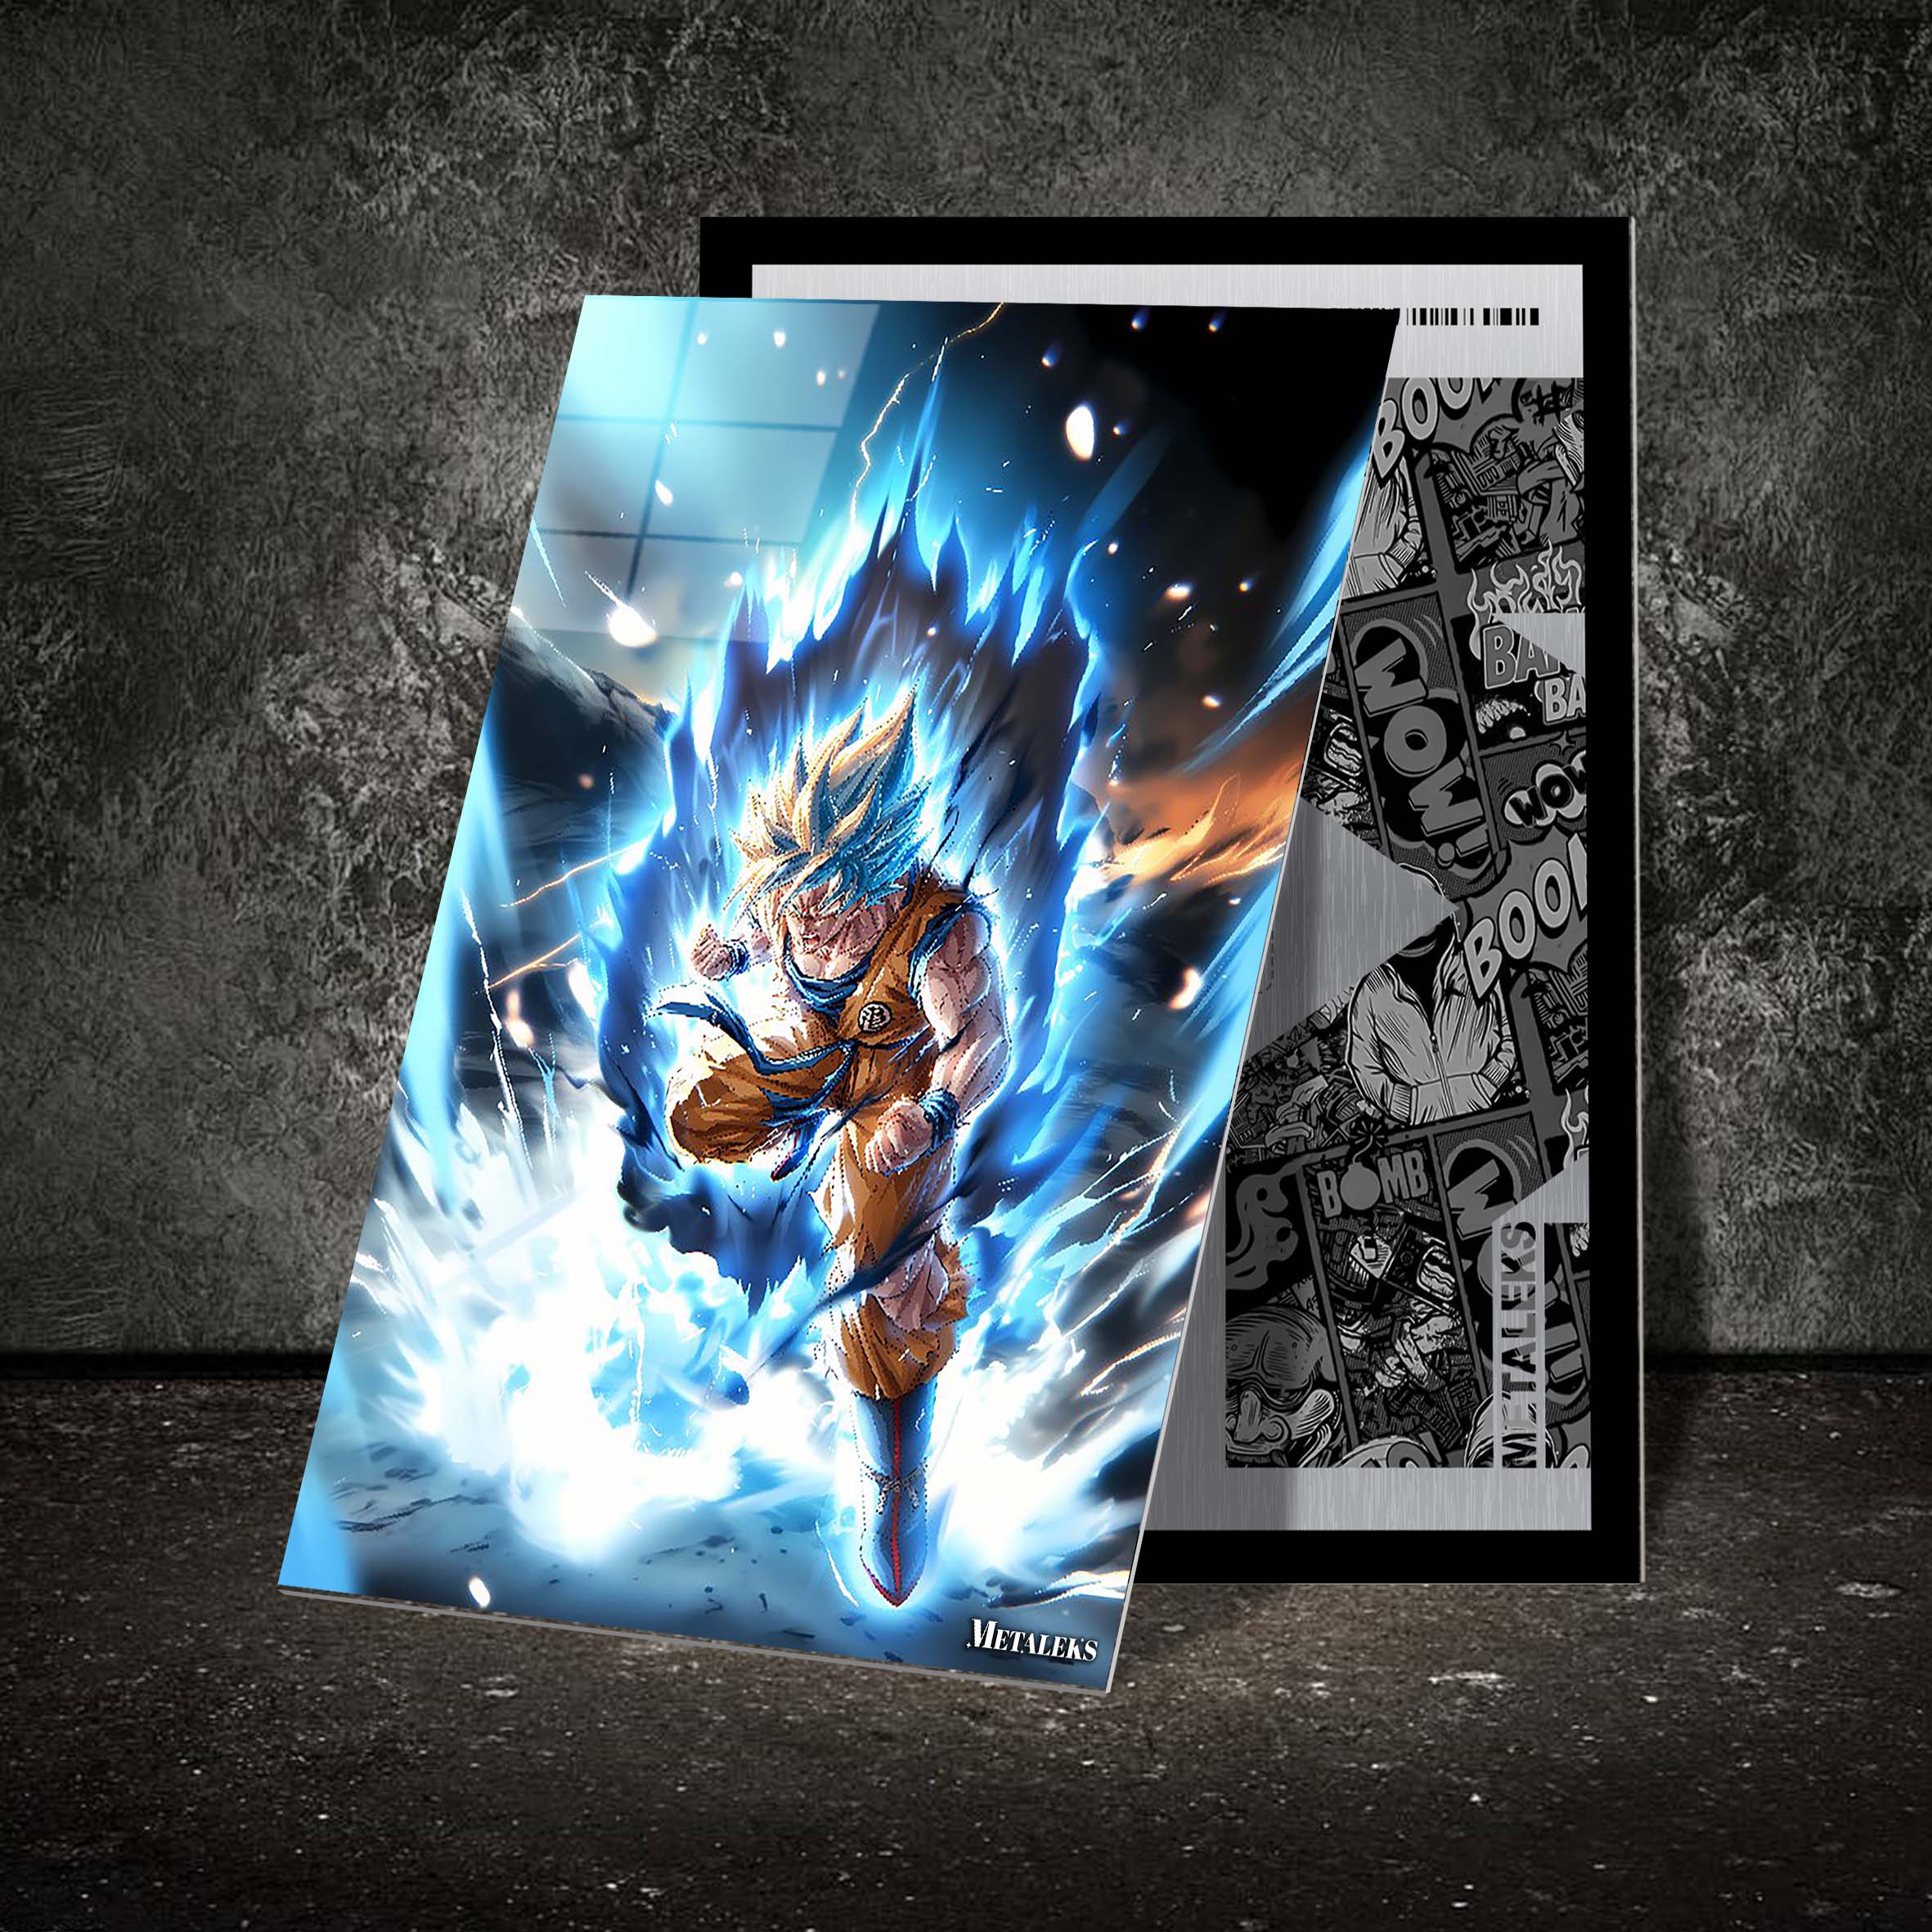 Goku angry from dragon ball z anime-designed by @Vid_M@tion